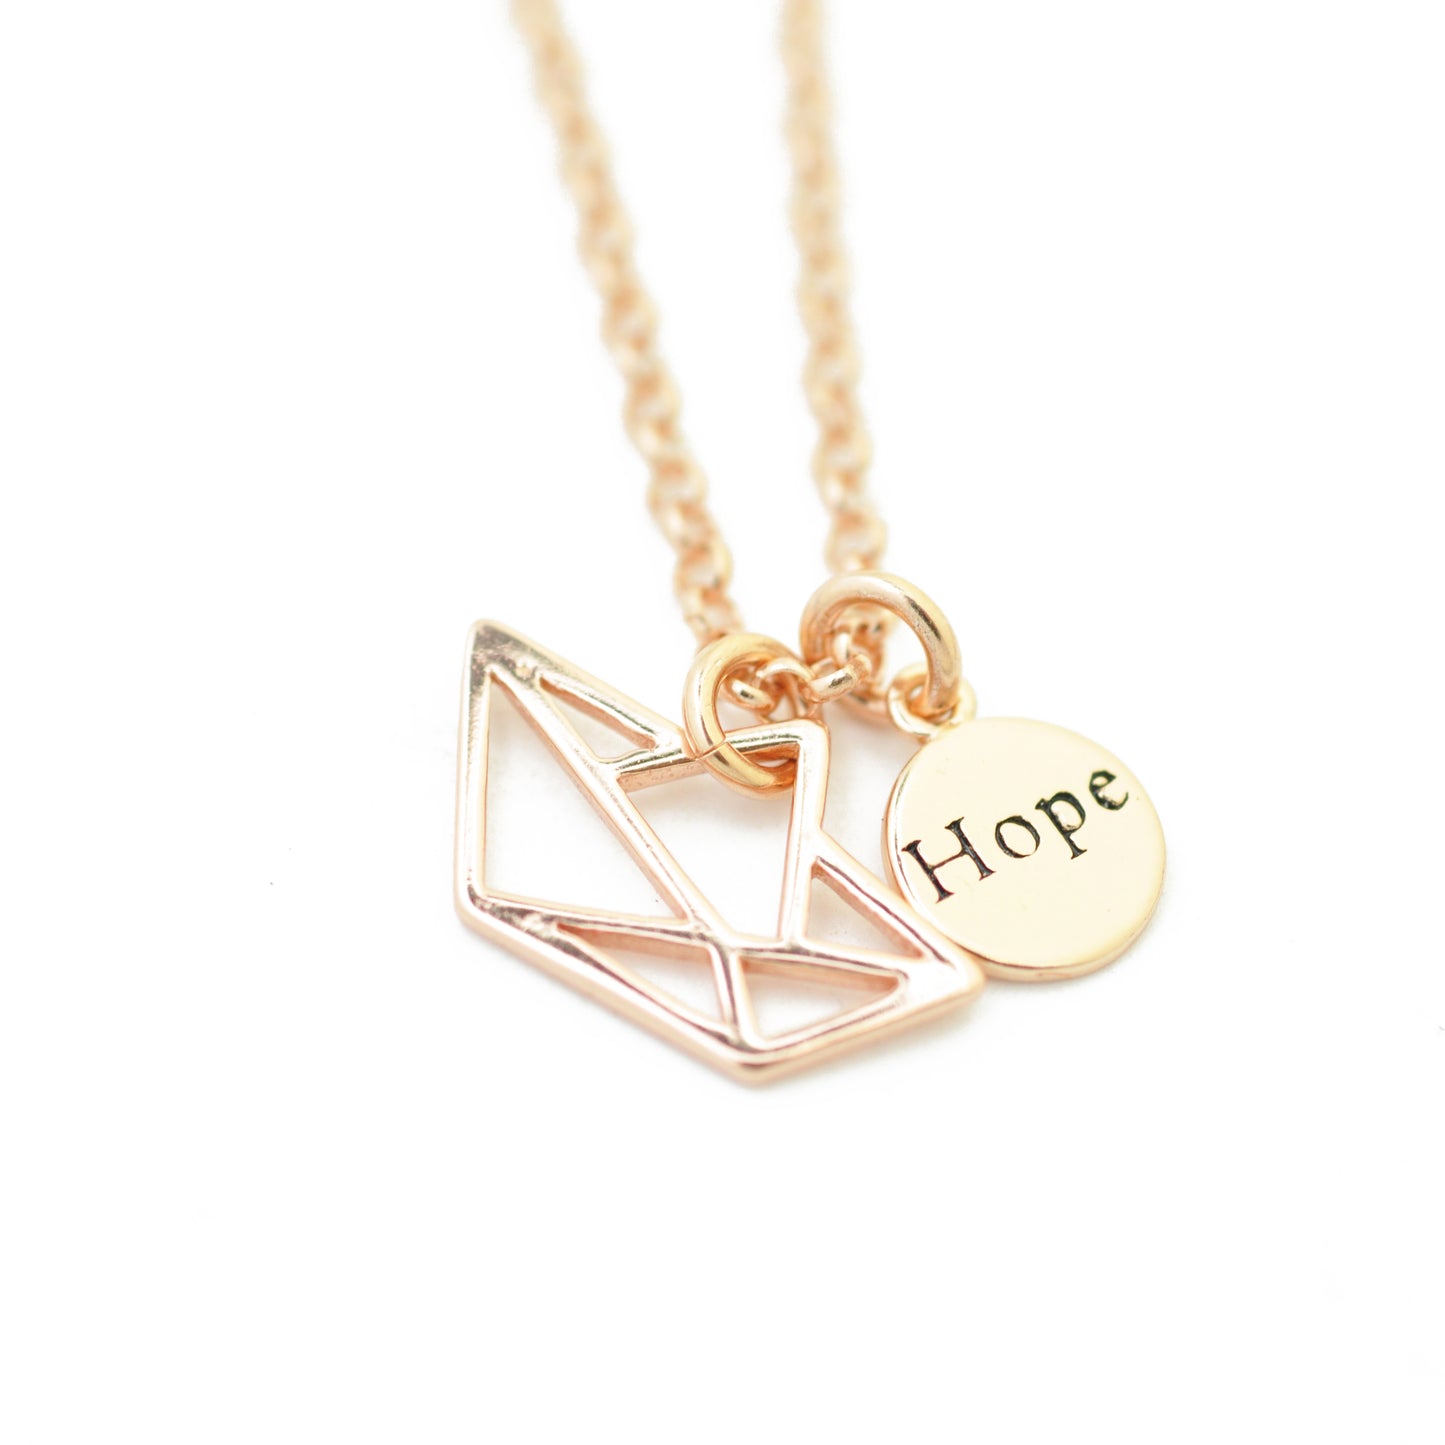 Pea chain with origami paper boat / paper ship &amp; hope pendant / 925 sterling silver / 42 cm